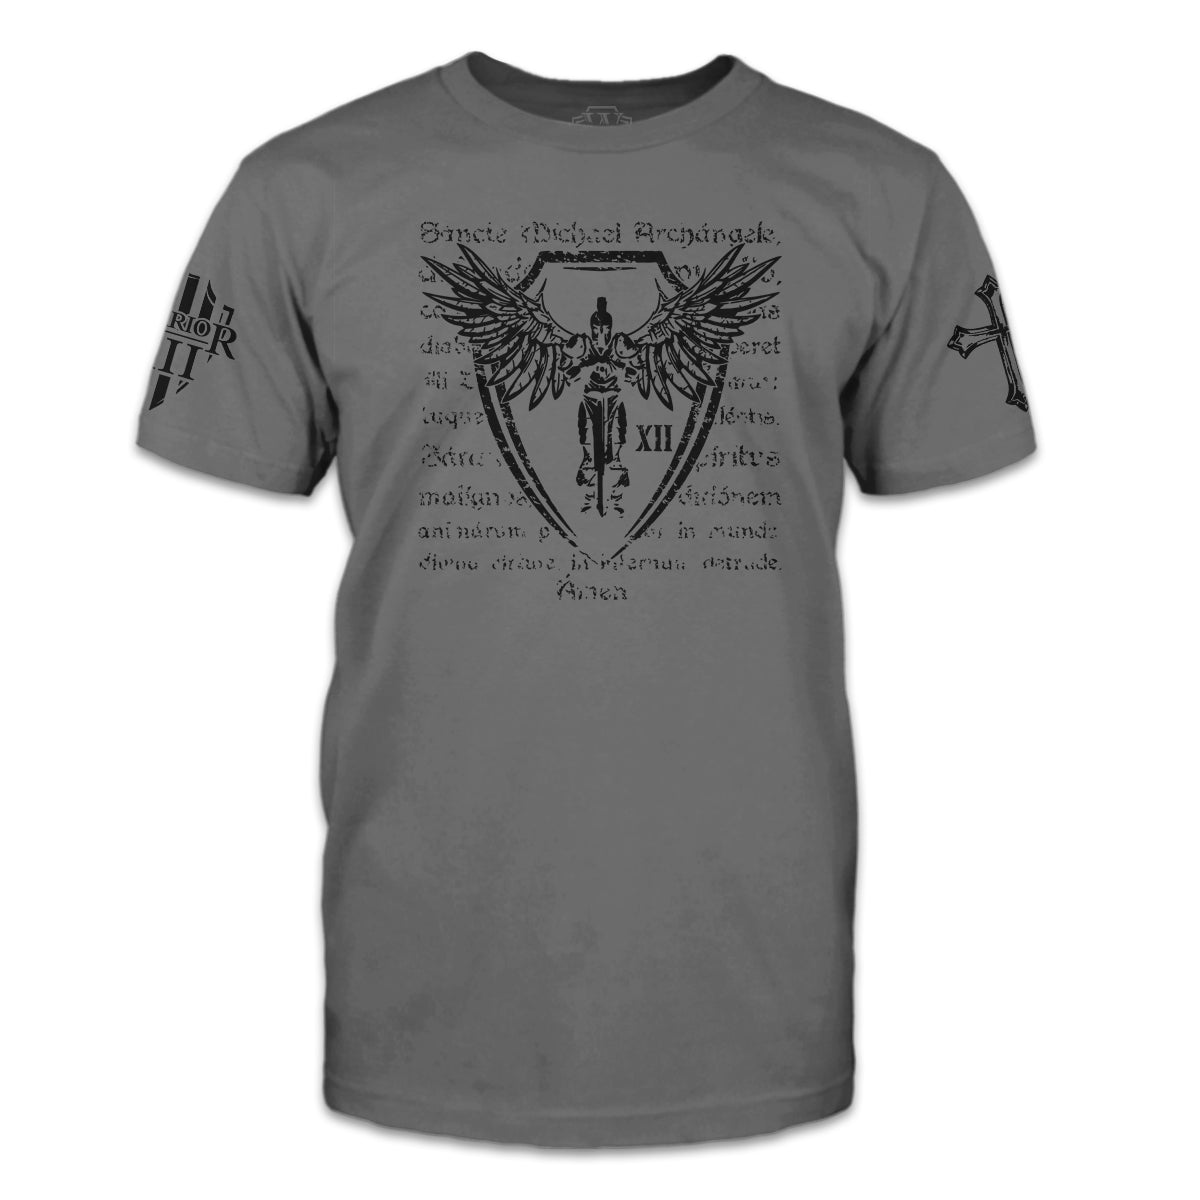 A grey shirt with Saint Michael Archangel with wings and writing printed on the front.